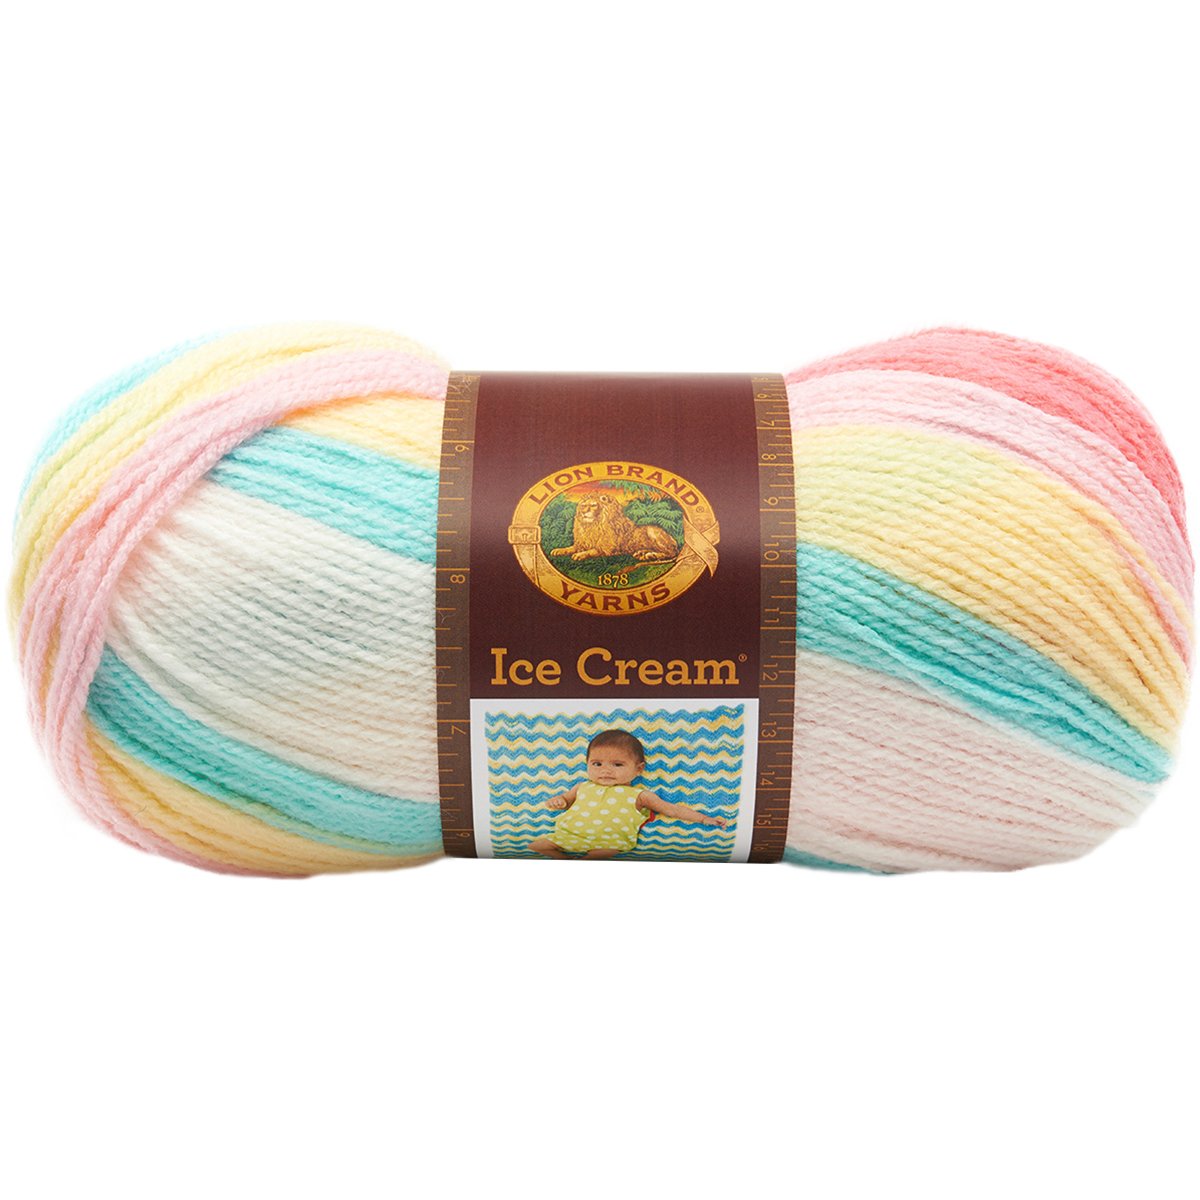 Lion Brand Ice Cream Cotton Candy 923-201 (6-Skeins - Same Dye Lot) Baby  Sport #2 Acrylic Yarn for Crocheting and Knitting - Bundle with 1 Artsiga